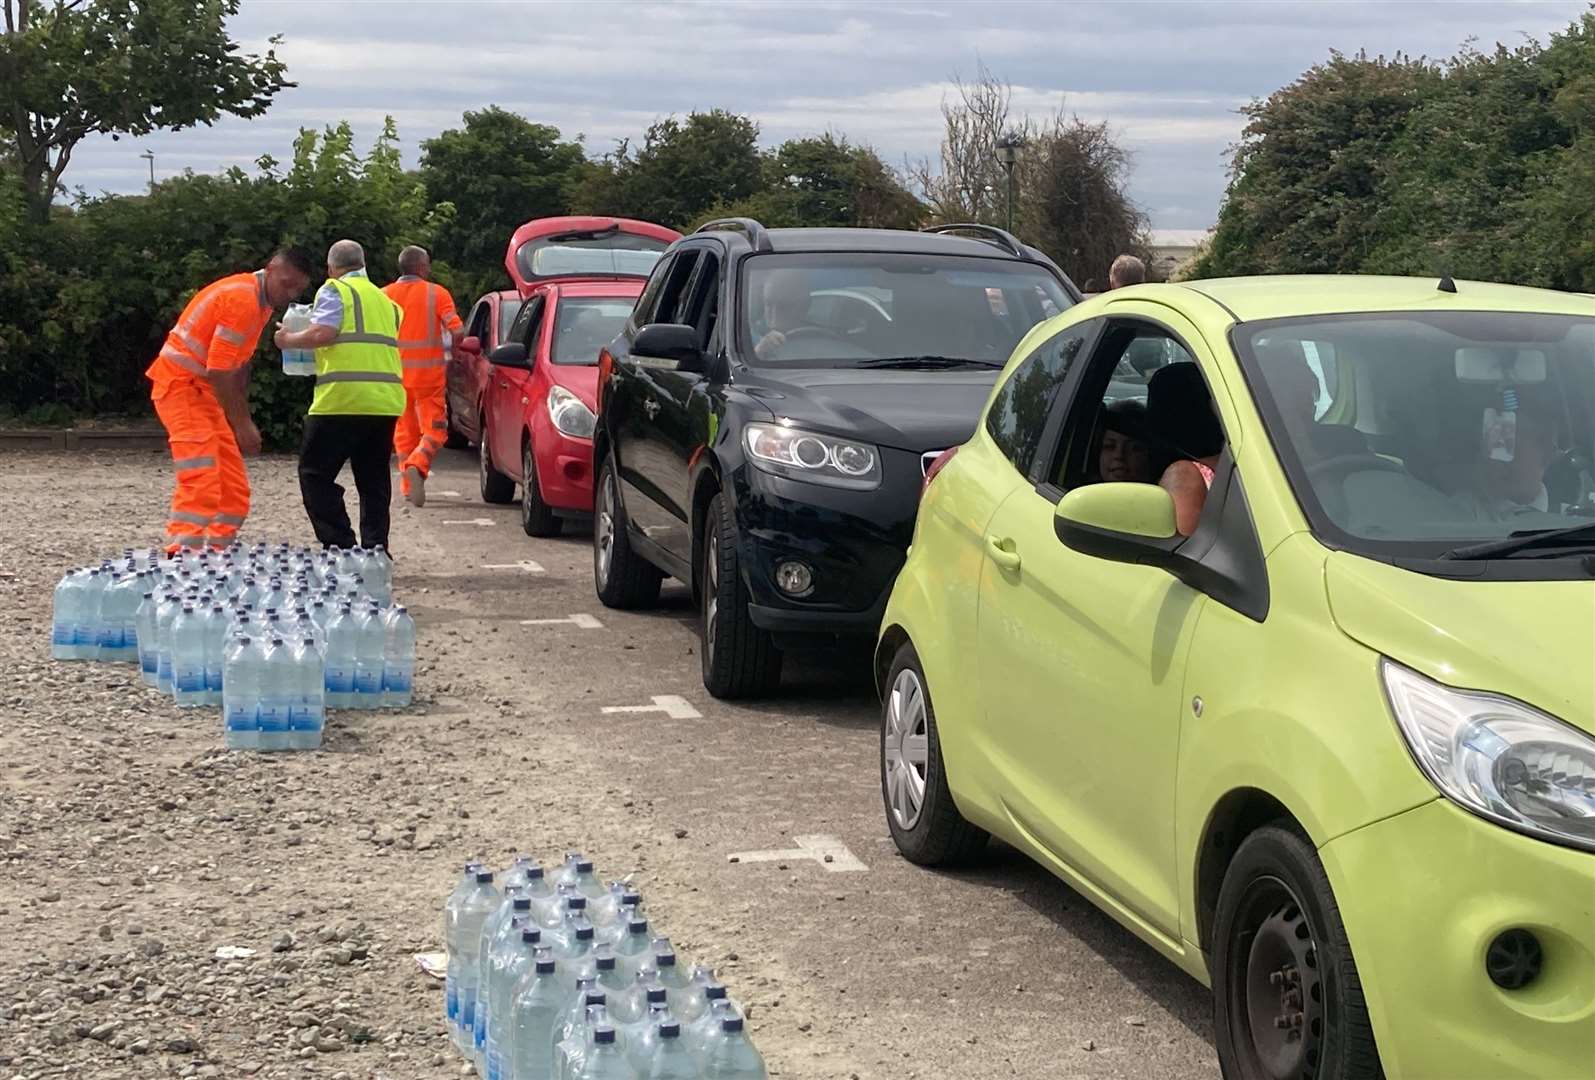 Water collection points were set up around the island for homes and businesses